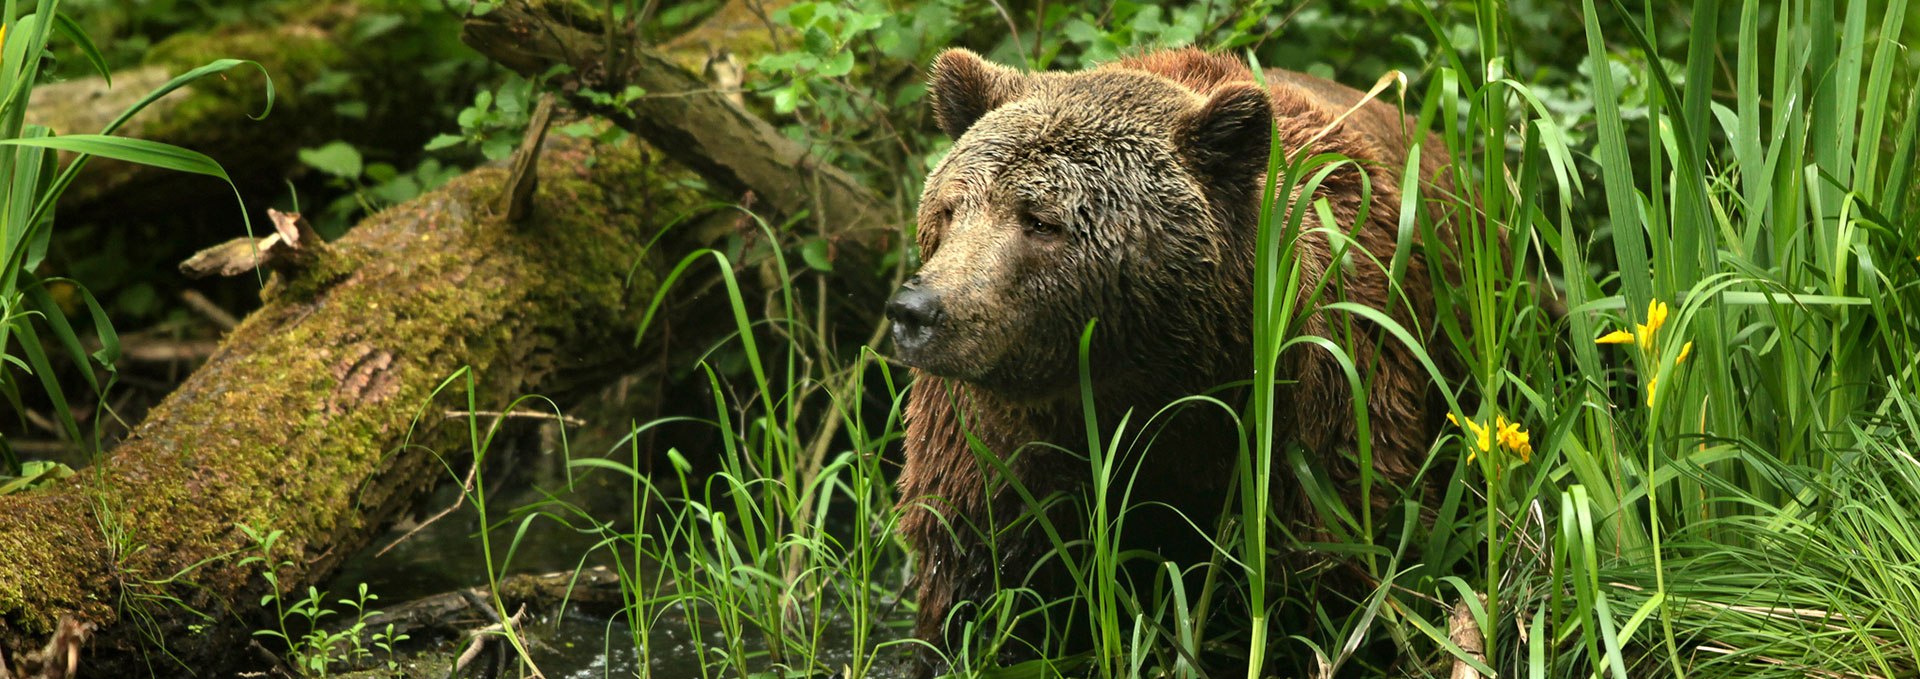 On the trail of rescued brown bears at the bear sanctuary, © Thomas Oppermann